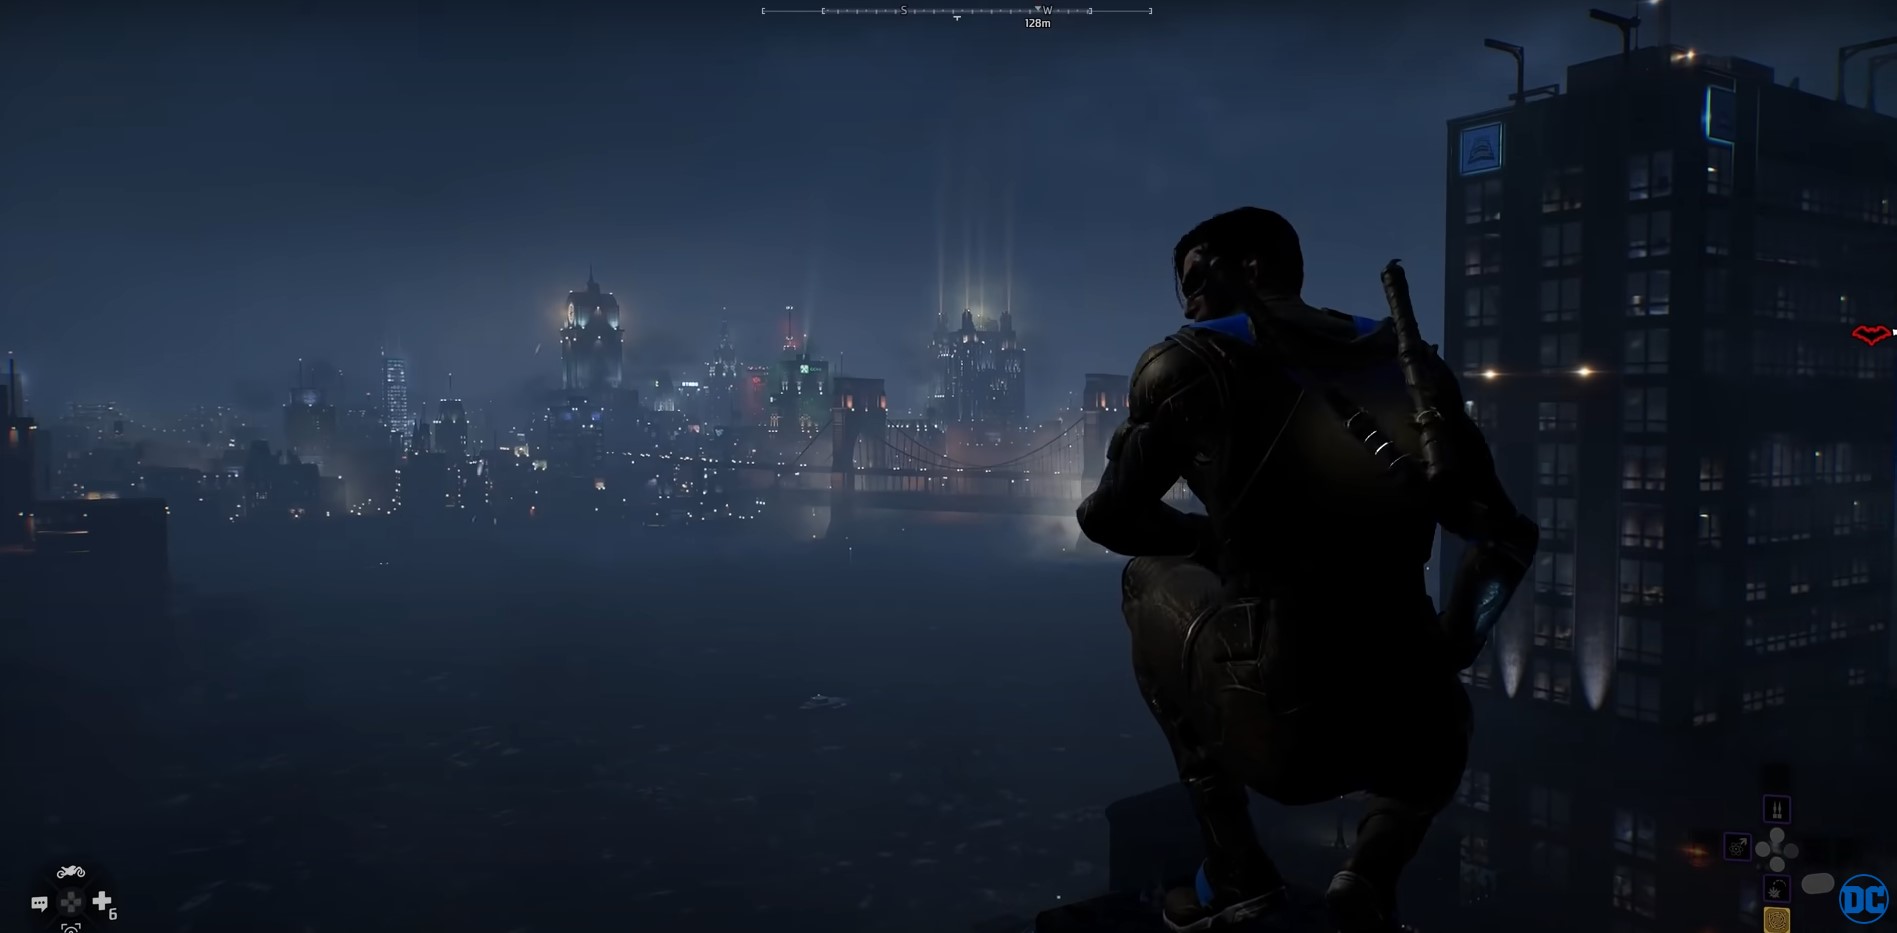 Gotham Knights spotlight turns to Red Hood in new gameplay trailer